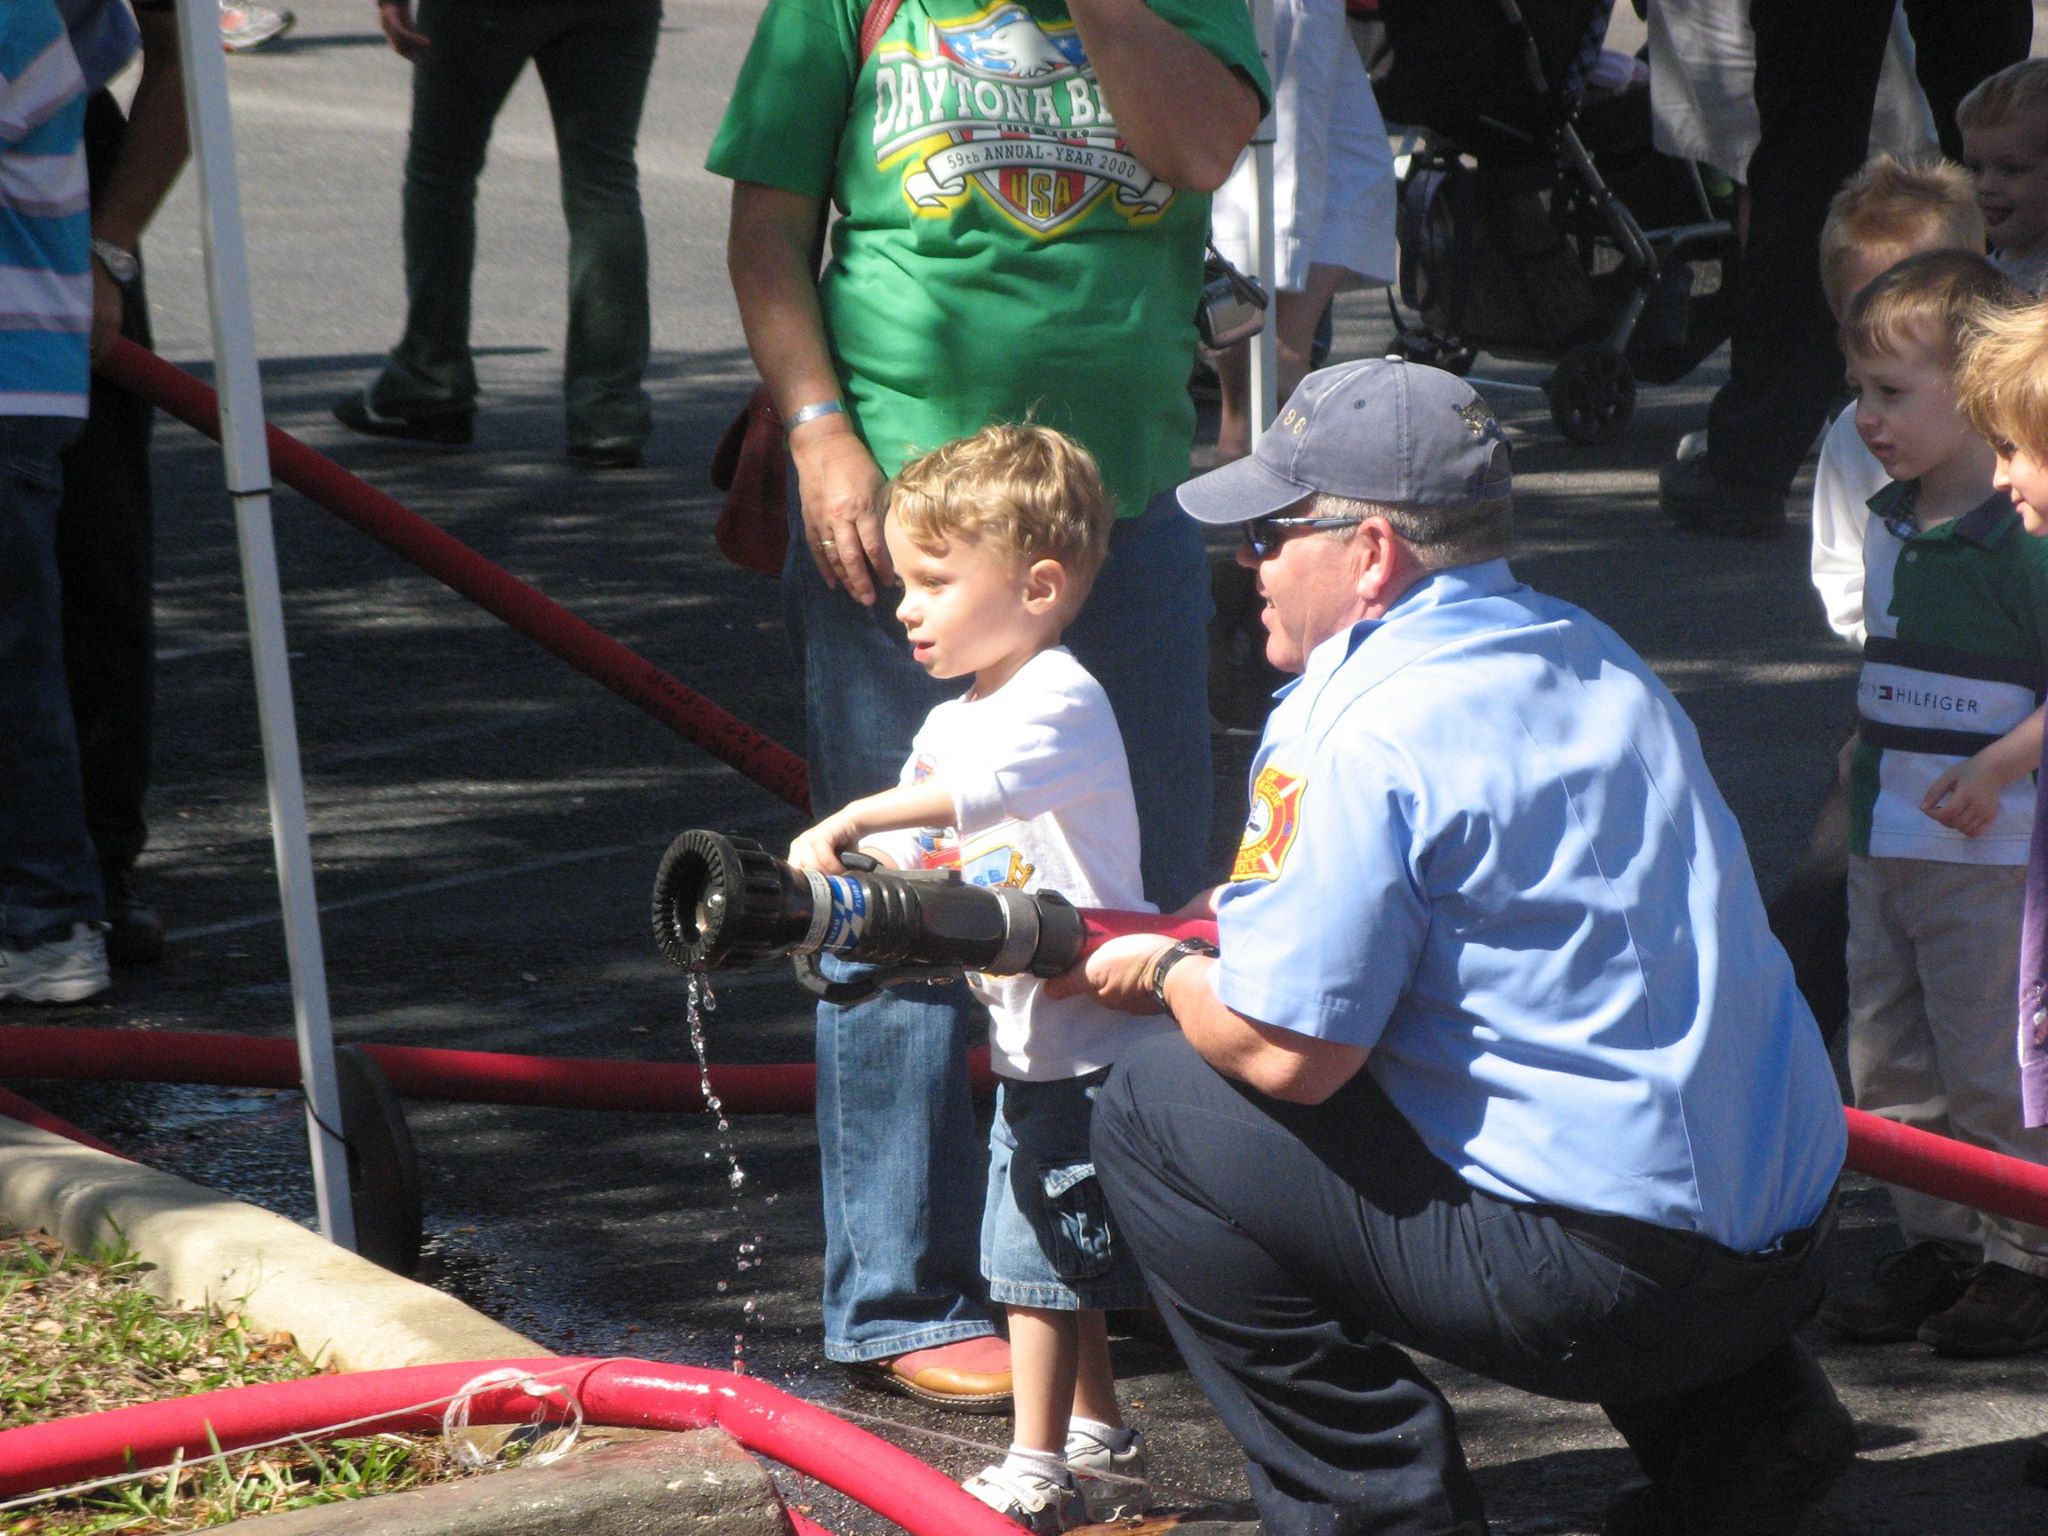 Firefighter and child